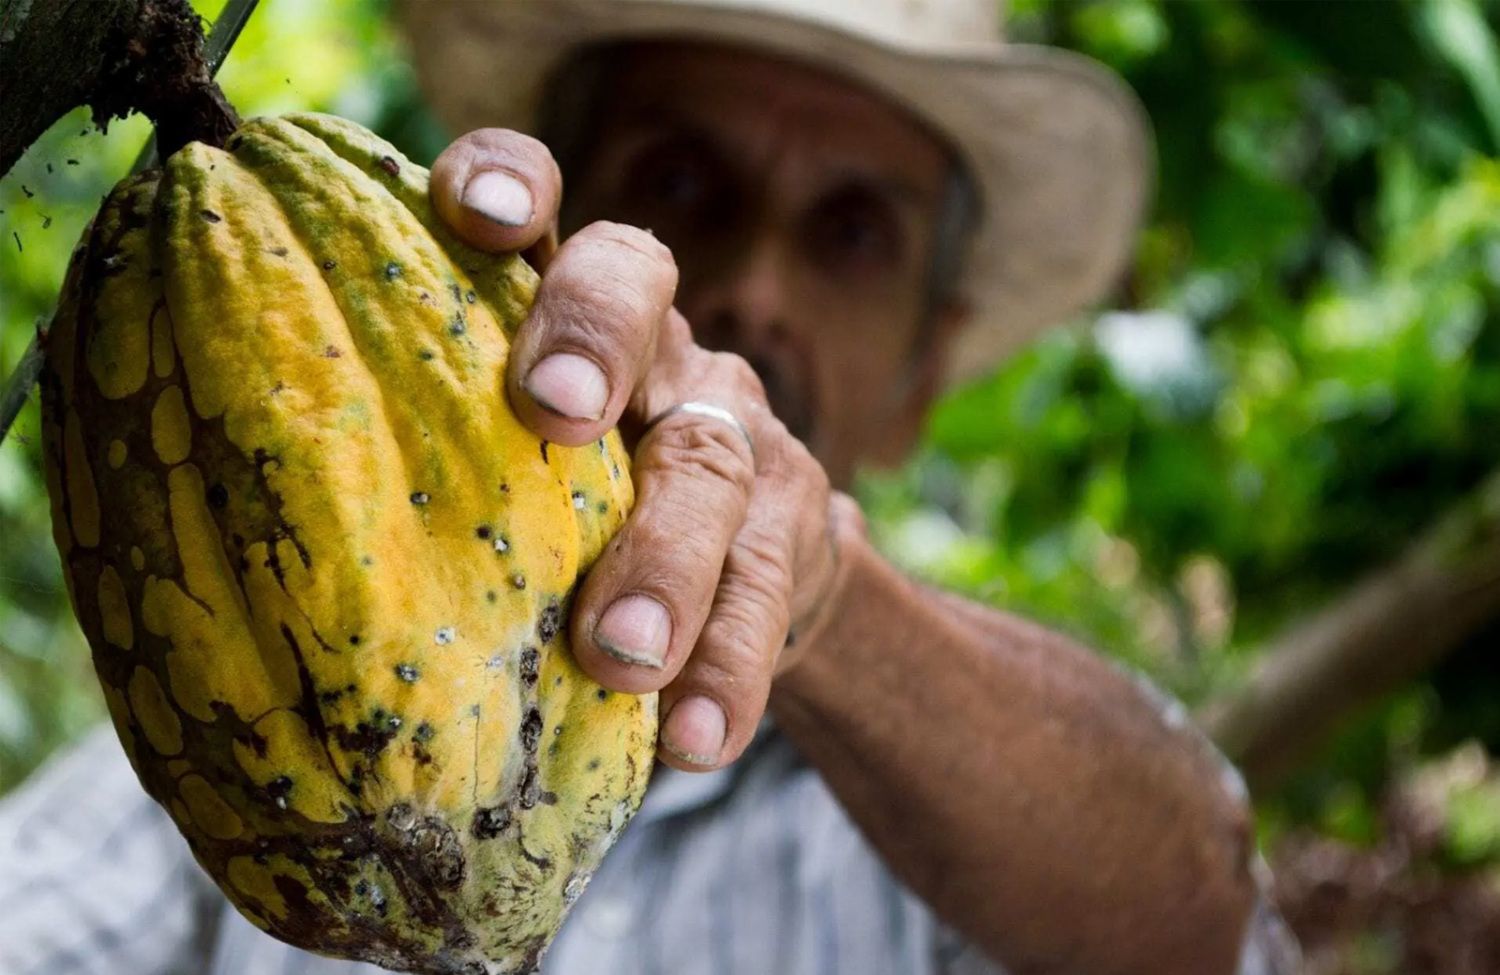 Farmworker holding up a fruit